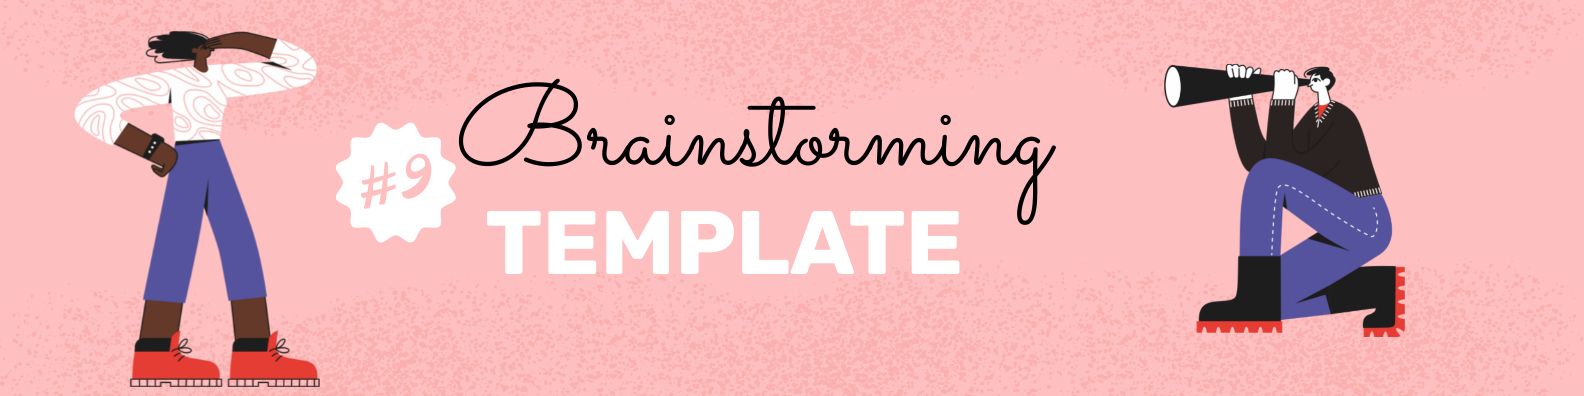 people are searching for brainstorming templates 9 